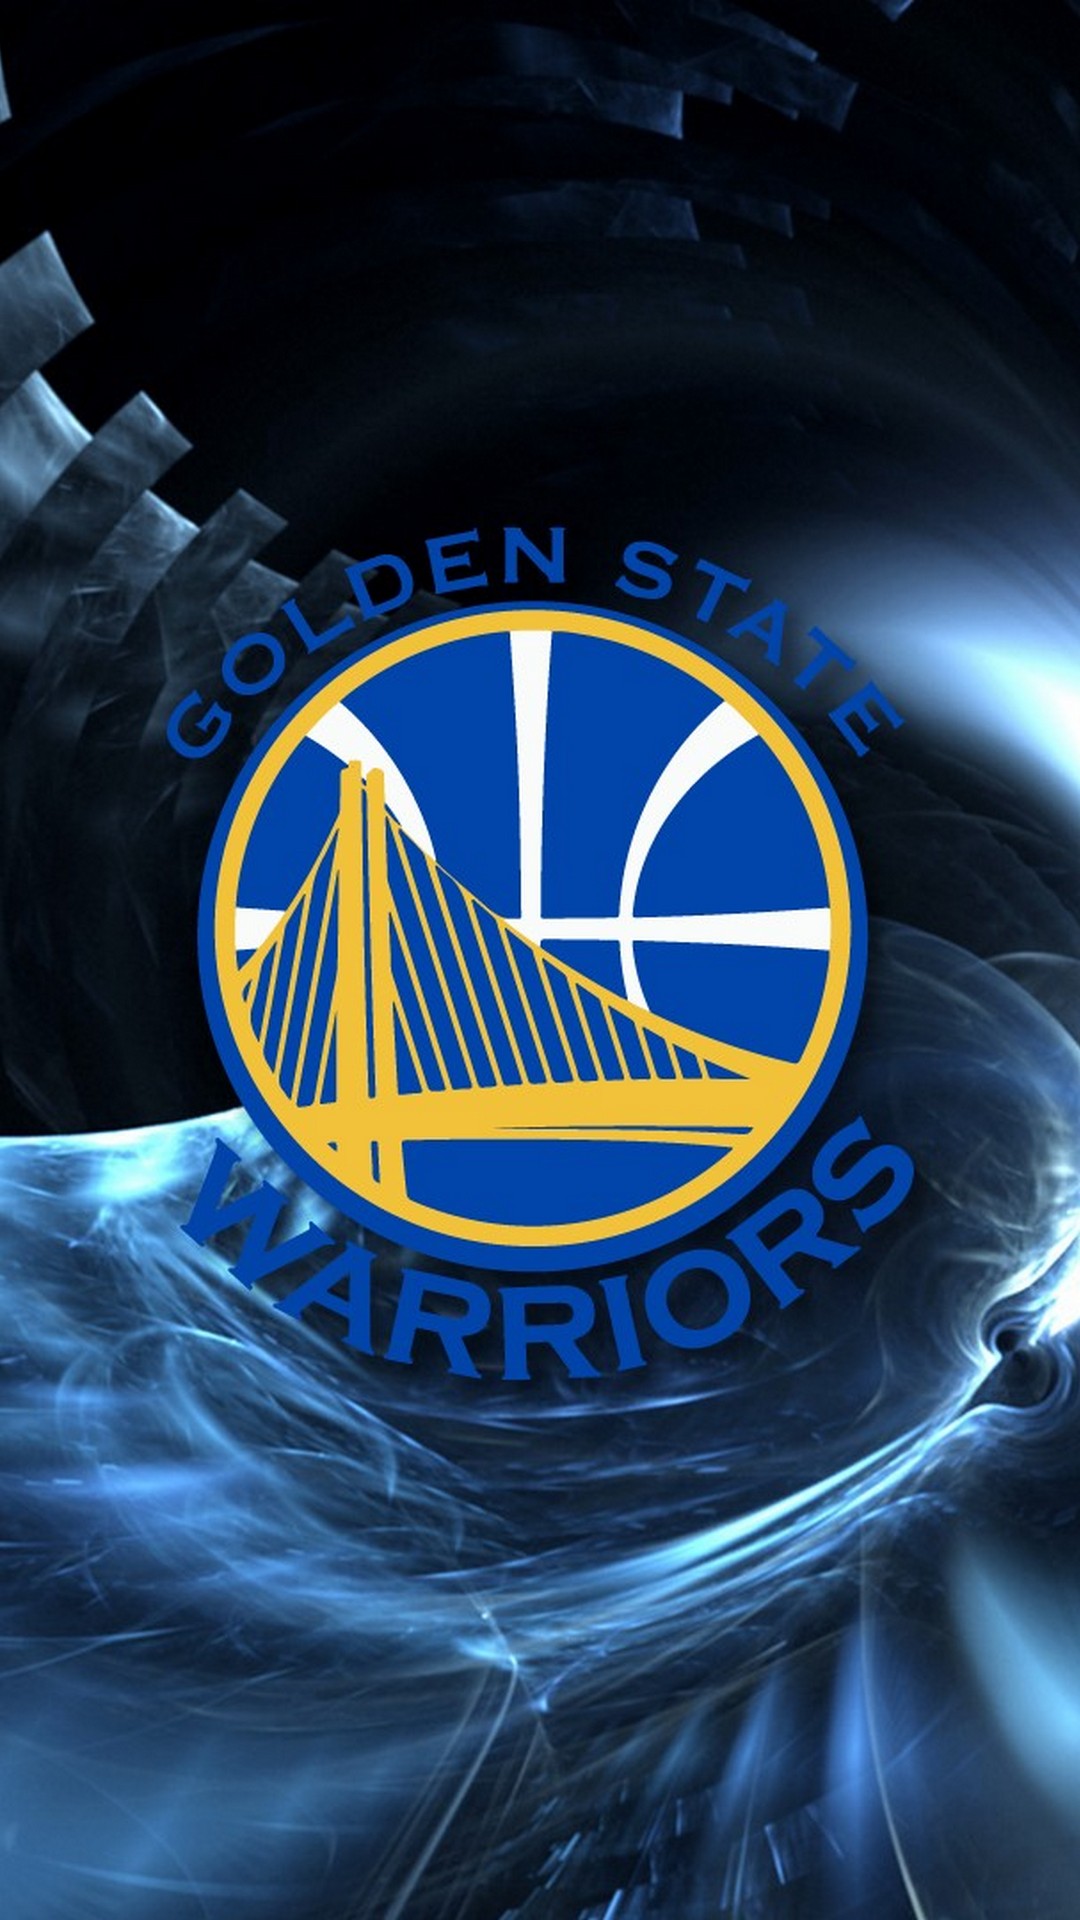 Golden State Warriors HD Wallpapers For Android with image resolution 1080x1920 pixel. You can make this wallpaper for your Android backgrounds, Tablet, Smartphones Screensavers and Mobile Phone Lock Screen